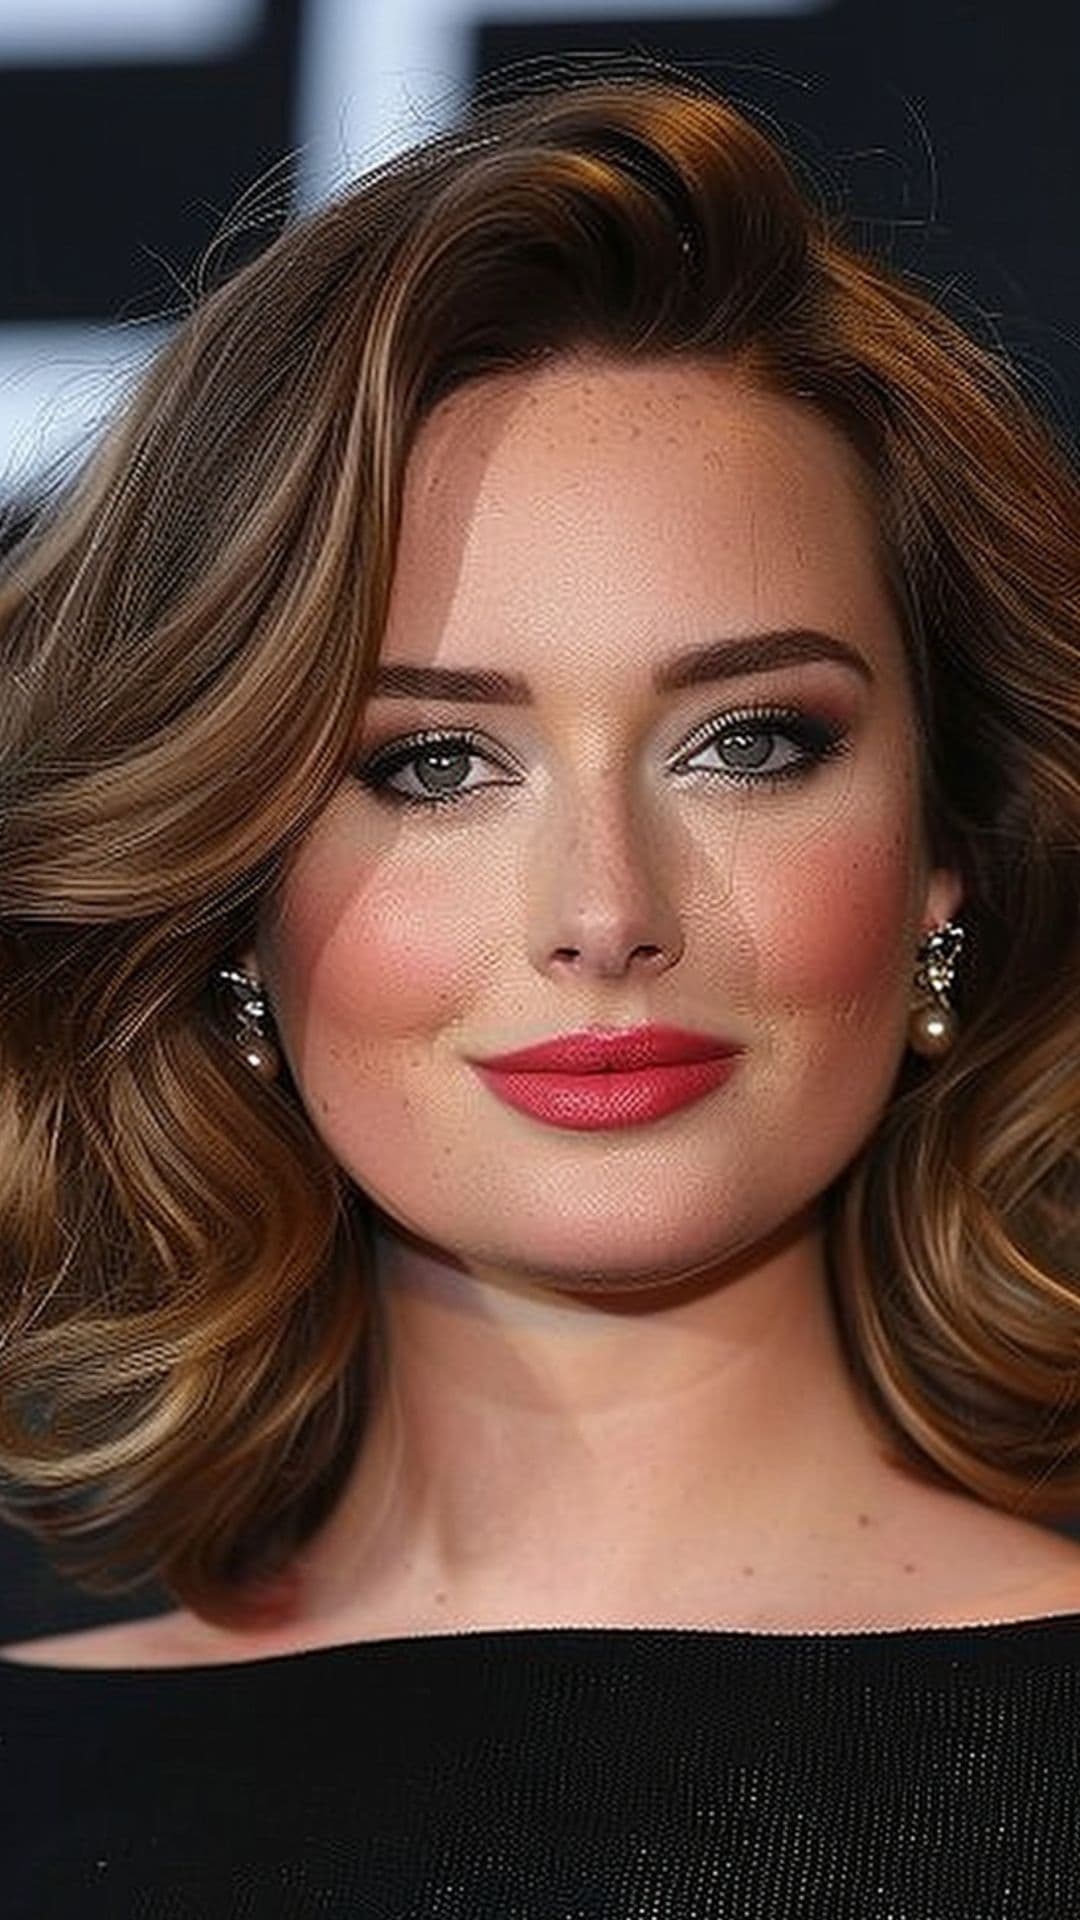 A woman modelling Adele's voluminous waves hairstyle.